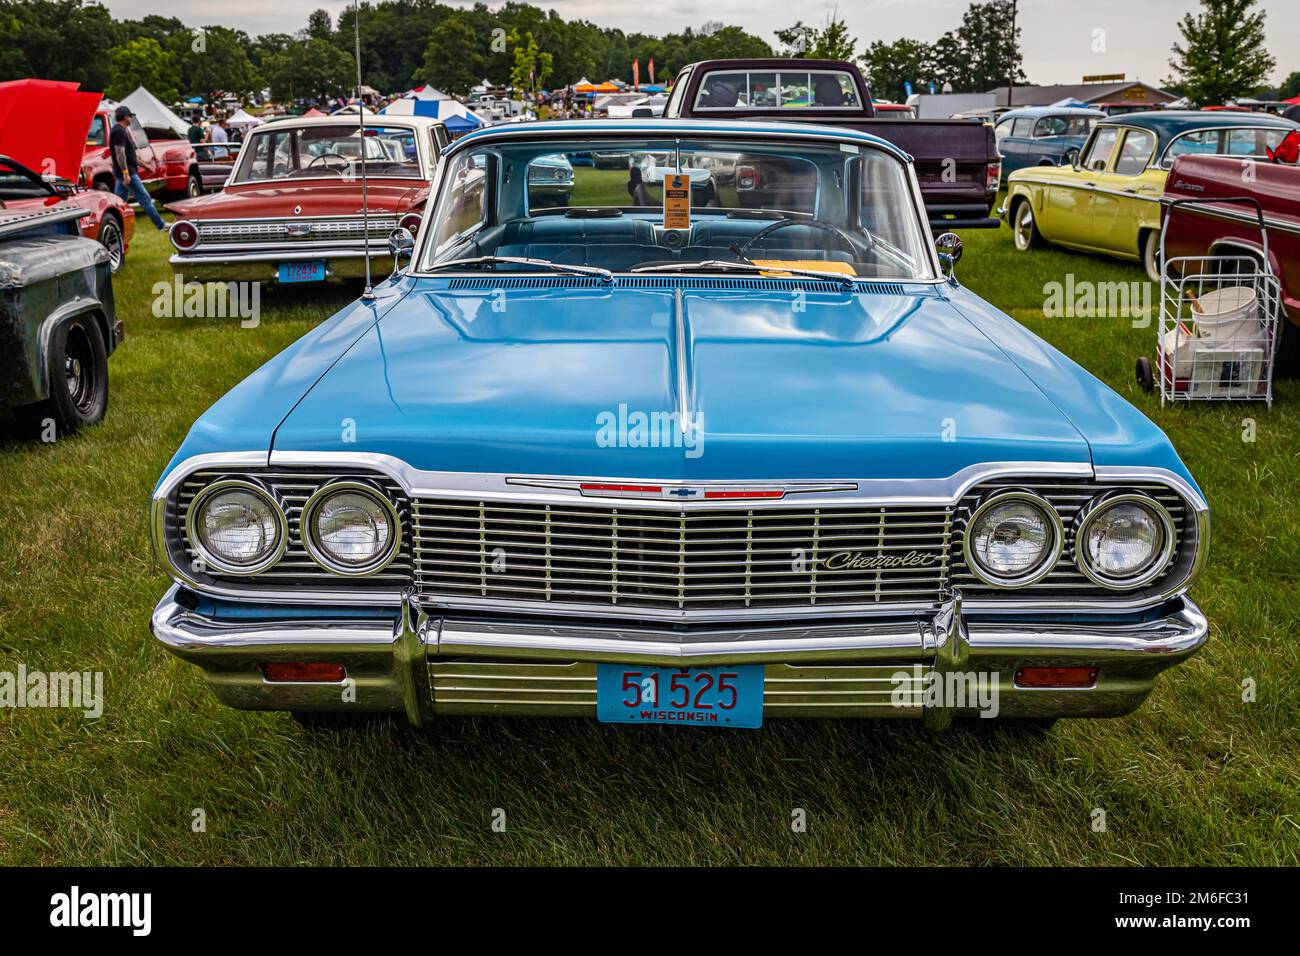 Iola, WI - July 07, 2022: High perspective front view of a 1964 Chevrolet Impala Sport Coupe at a local car show. Stock Photo